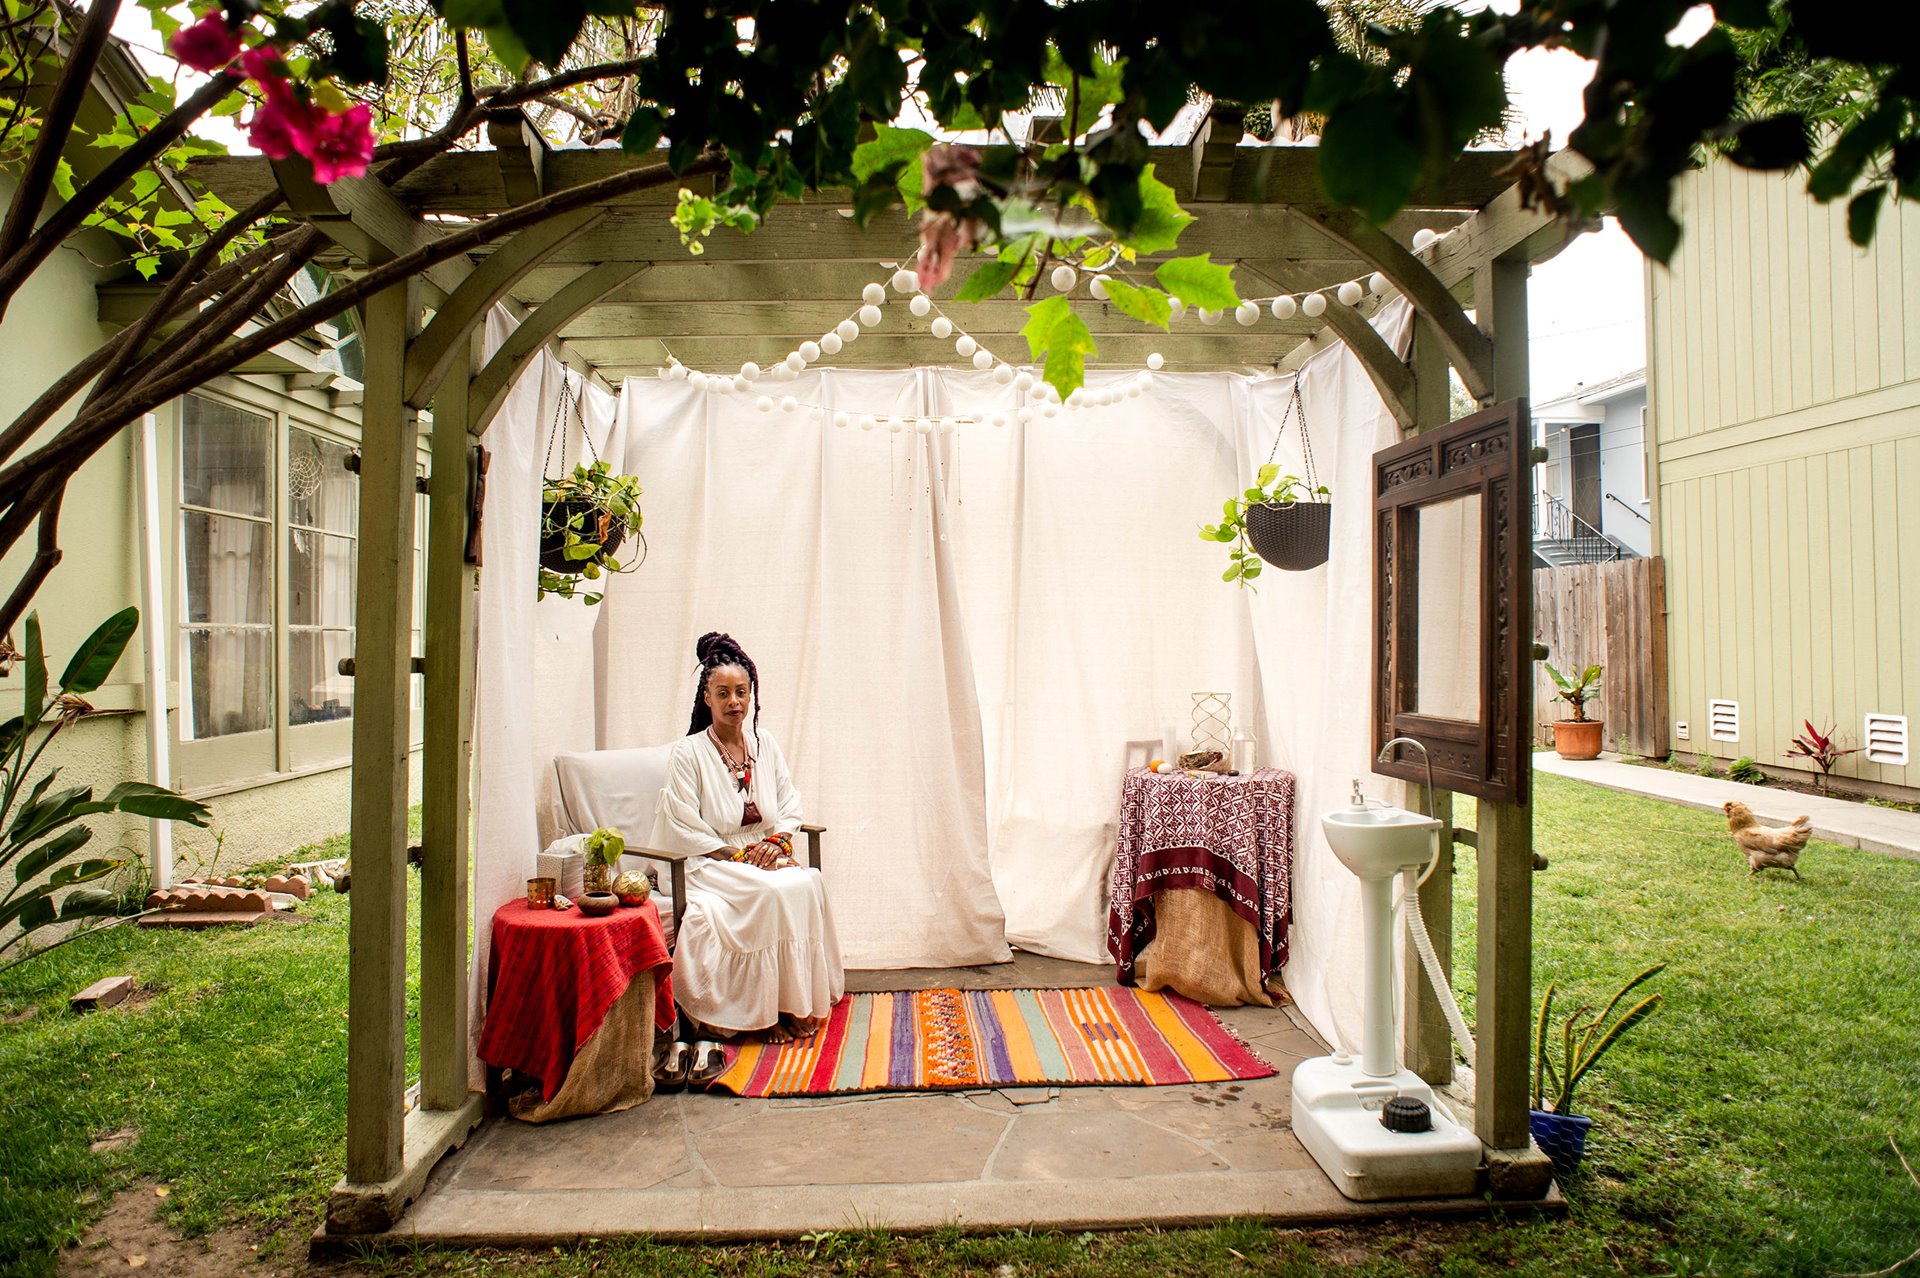 Midwife Racha Tahani Lawler sits in the space in her garden where she meets with clients, in Los Angeles County, USA. Lawler once owned a community birth center, but without medical insurance covering midwifery found it to be difficult to sustain and now assists at home births.